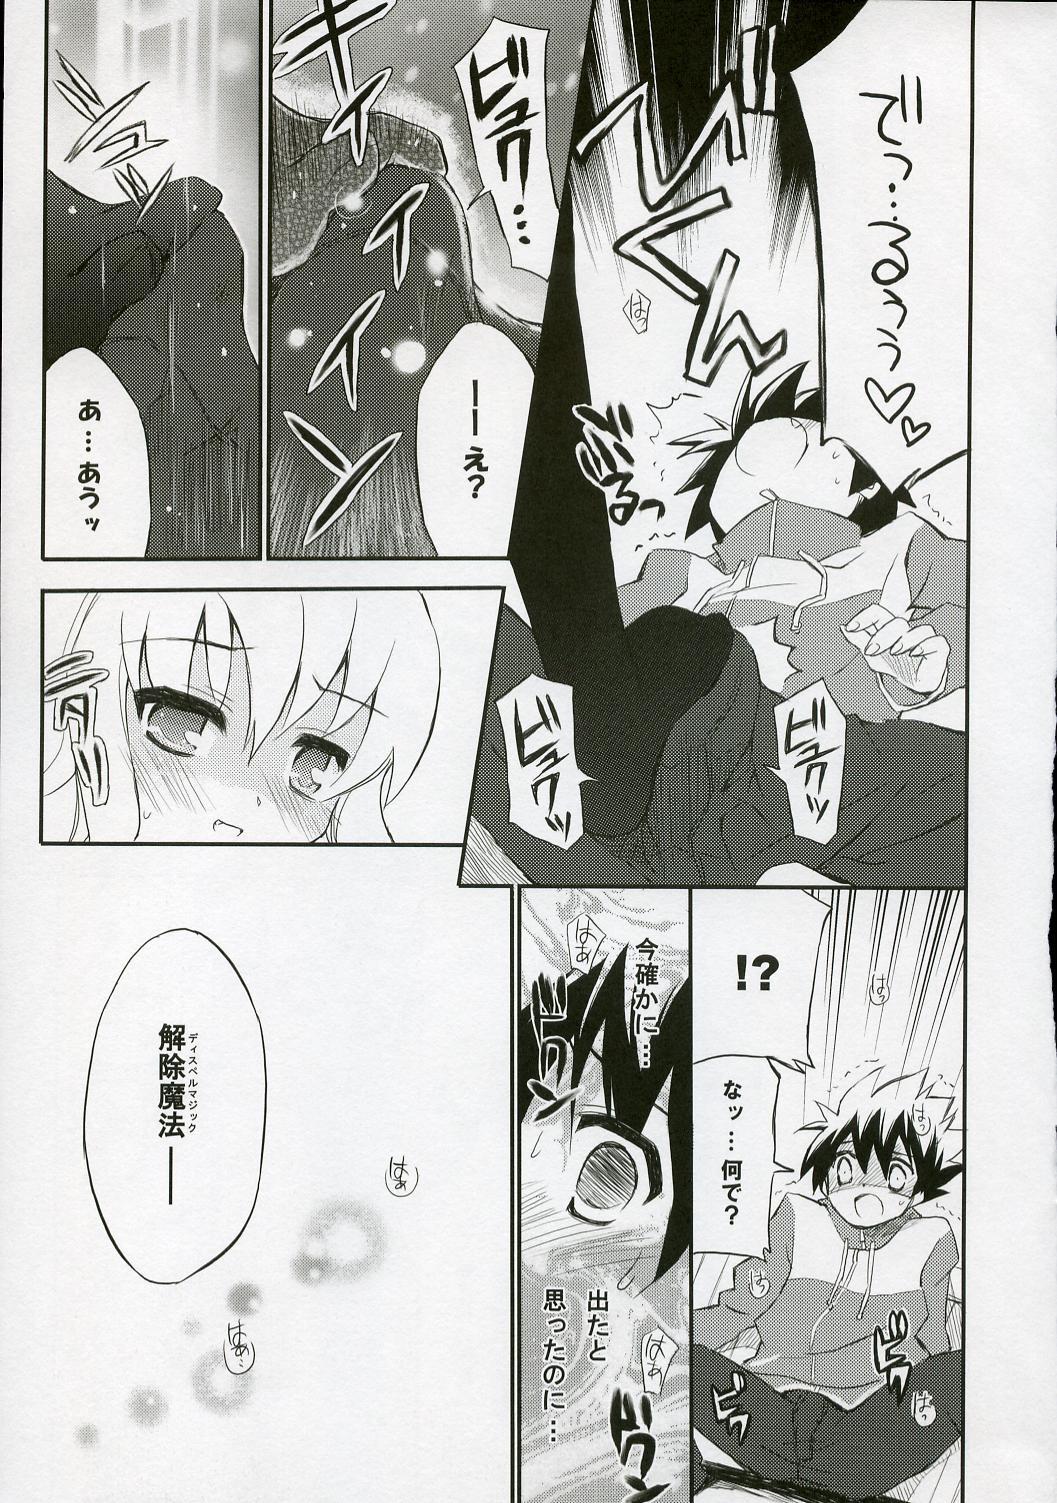 First BS#12 Louise to Mata Asobo - Let's Play with Louise Again - Zero no tsukaima Black Woman - Page 8